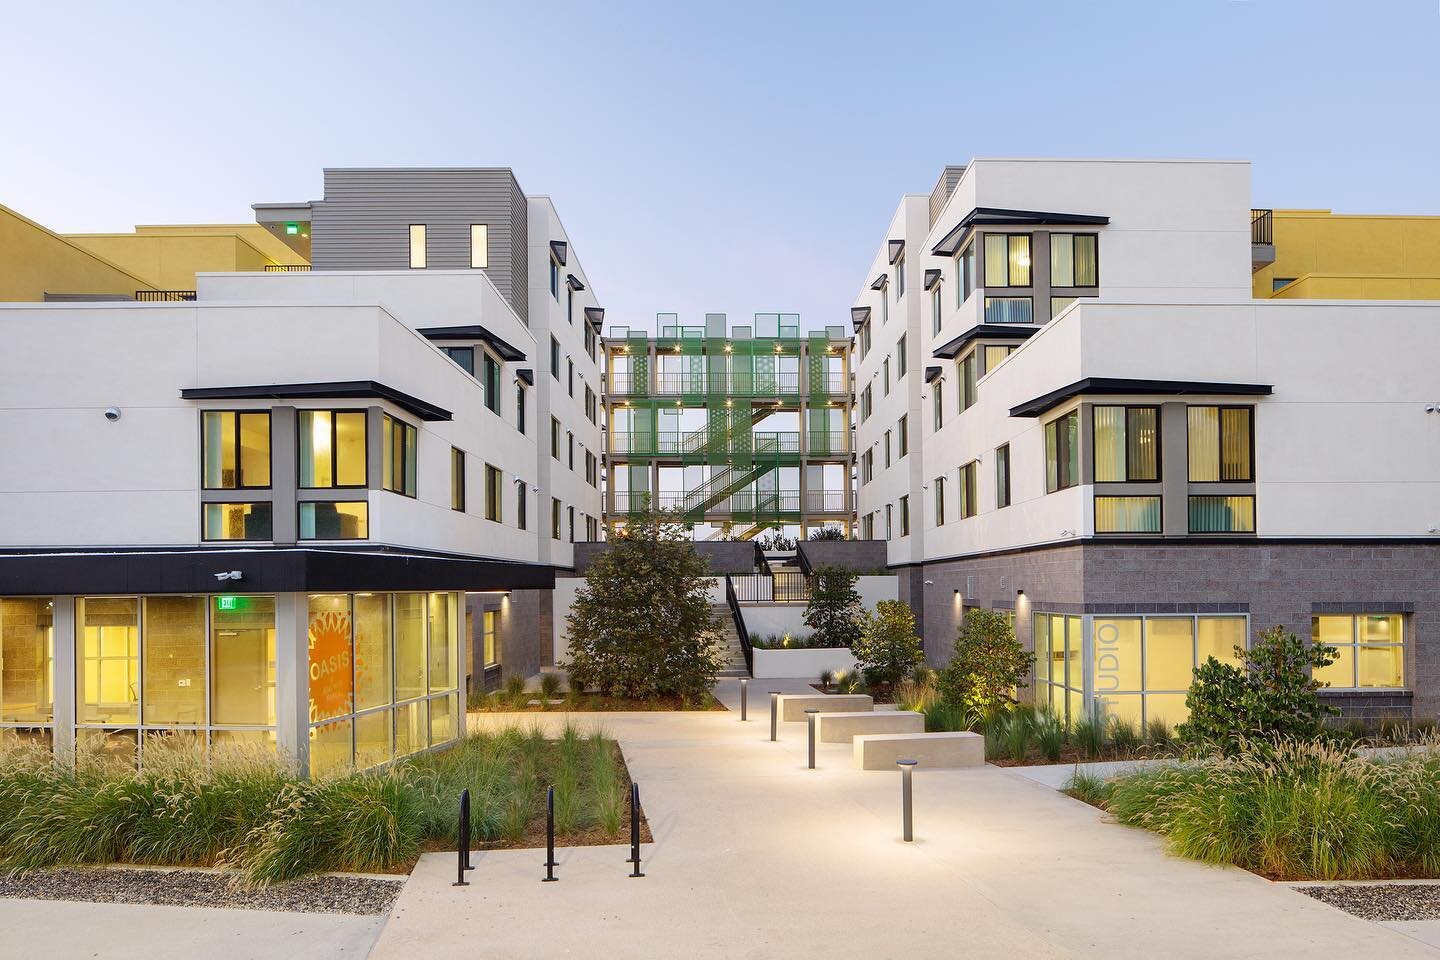 HUD recently published a case study featuring Anchor Place at CVC as a part of it's series on strategies that increase affordable housing opportunities, supportive housing and community connection. Read the full article in the link in our bio. @hudgo